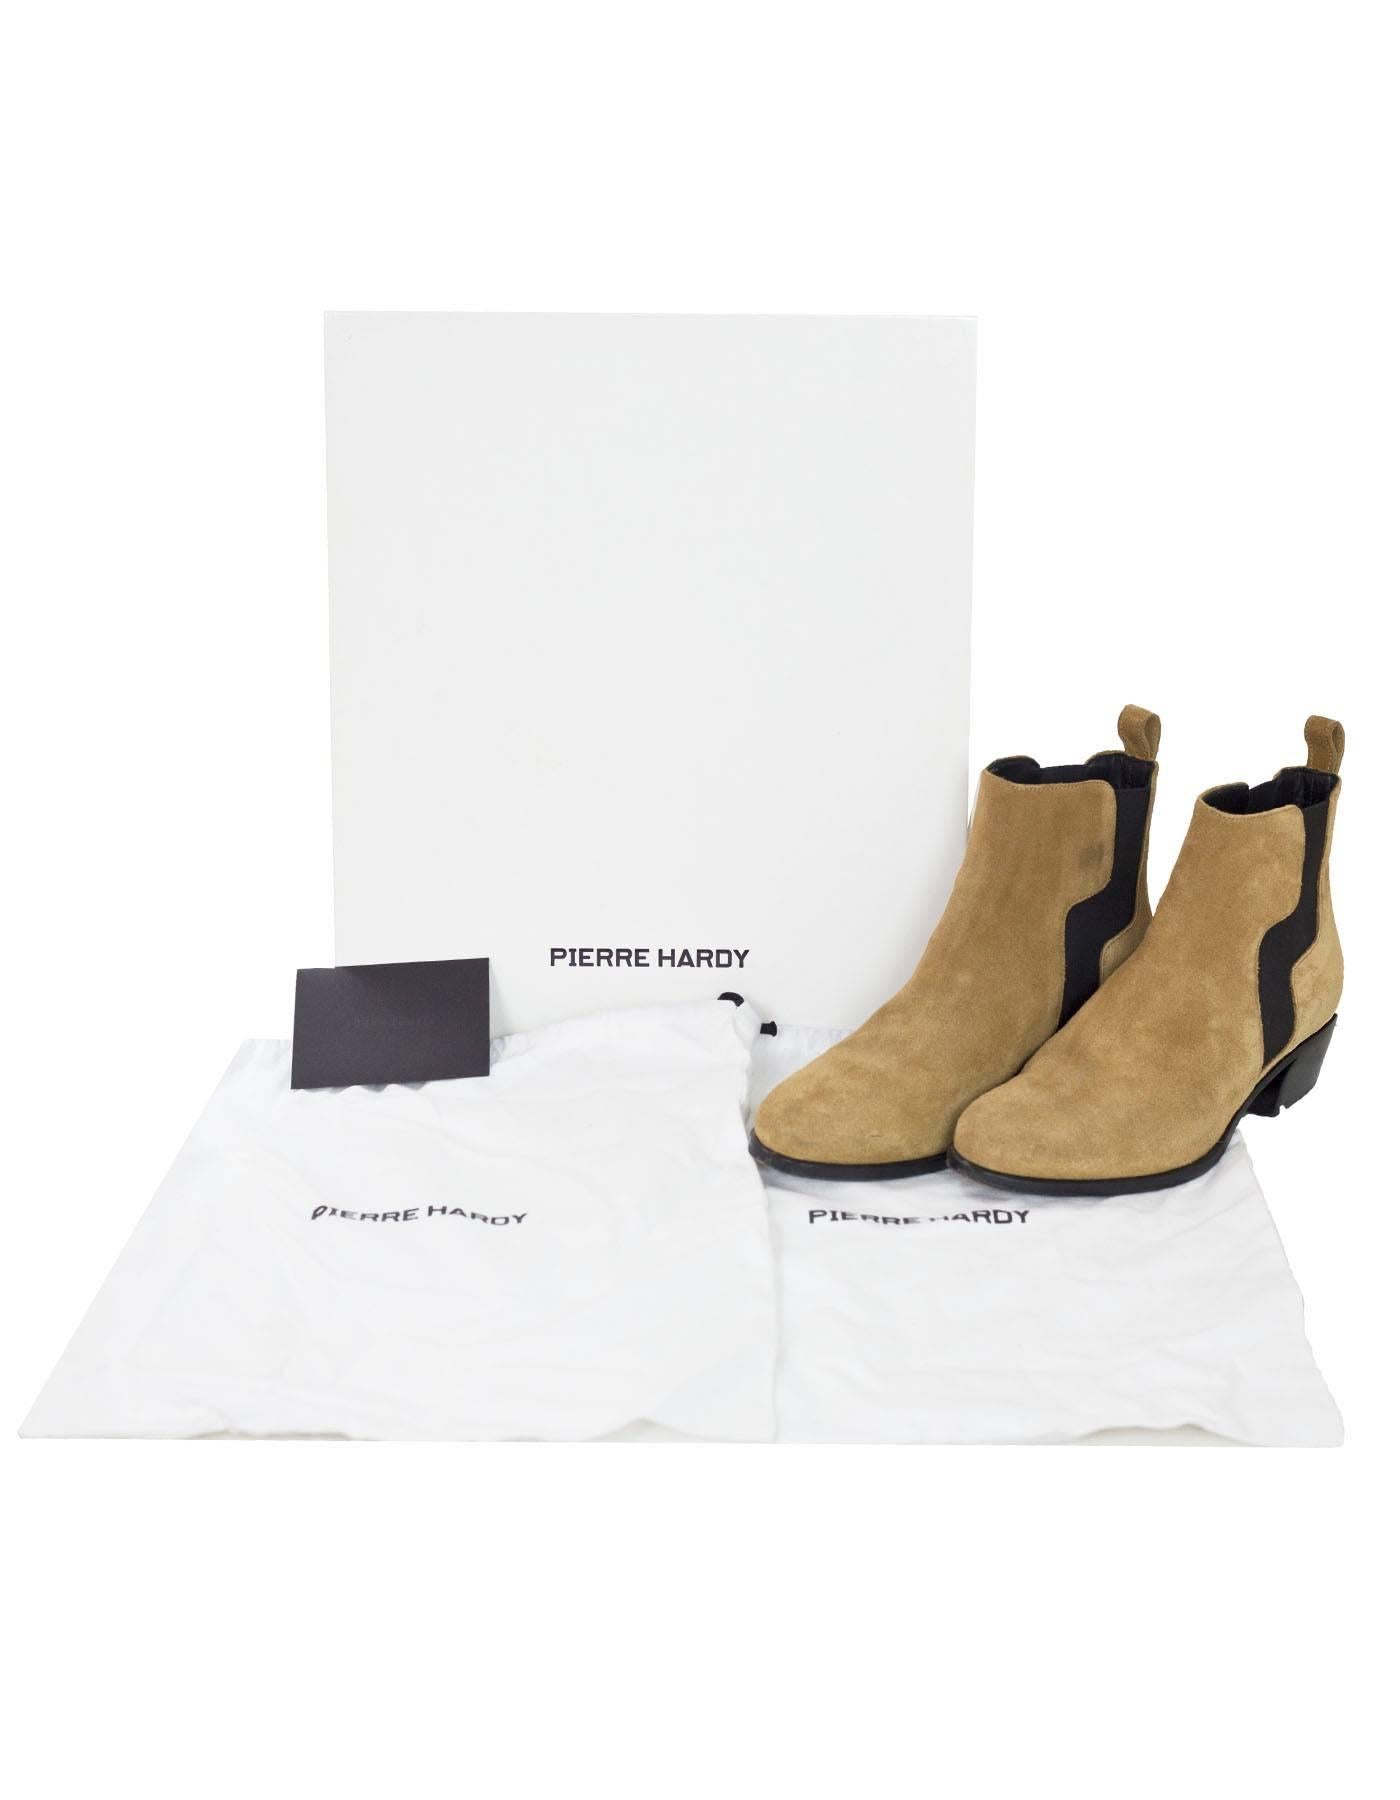 Pierre Hardy Camel Suede Gipsy Ankle Boots Sz 36 with Box 1